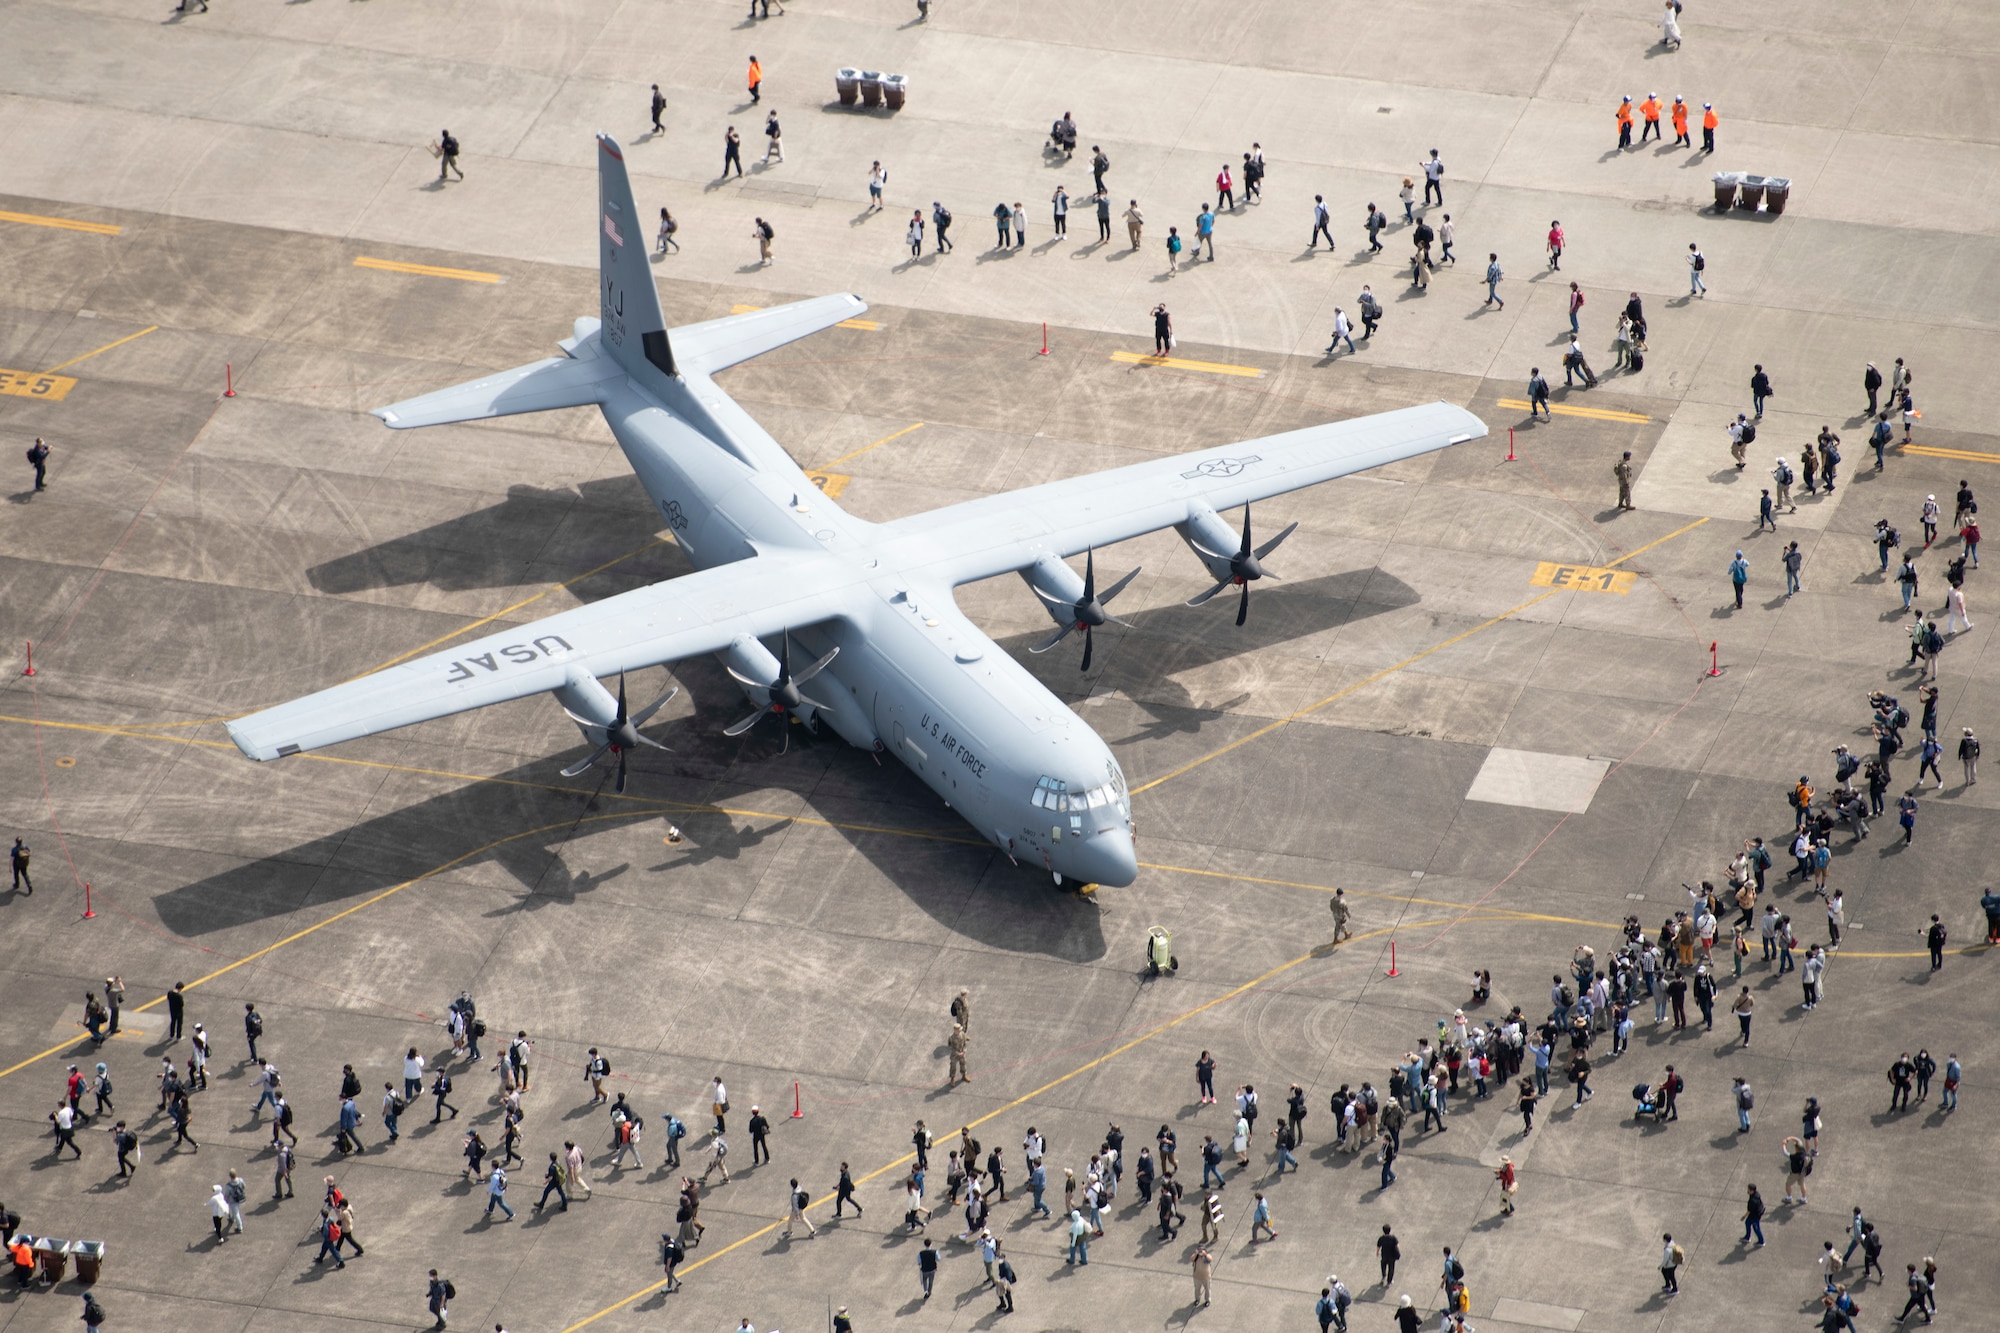 Festival guests begin to crowd around a C-130J Super Hercules belonging to the 36th Airlift Squadron during the opening of Friendship Festival 2022, at Yokota Air Base, Japan, May 22, 2022. The two-day festival was an opportunity for visitors to learn more about the U.S. and Japan bilateral partnership, while strengthening the bonds between Yokota and the local communities. Yokota was able to host the event with the support of Japanese Self-Defense Force, sister services and the local community. (U.S. Air Force photo by Staff Sgt. Ryan Lackey)